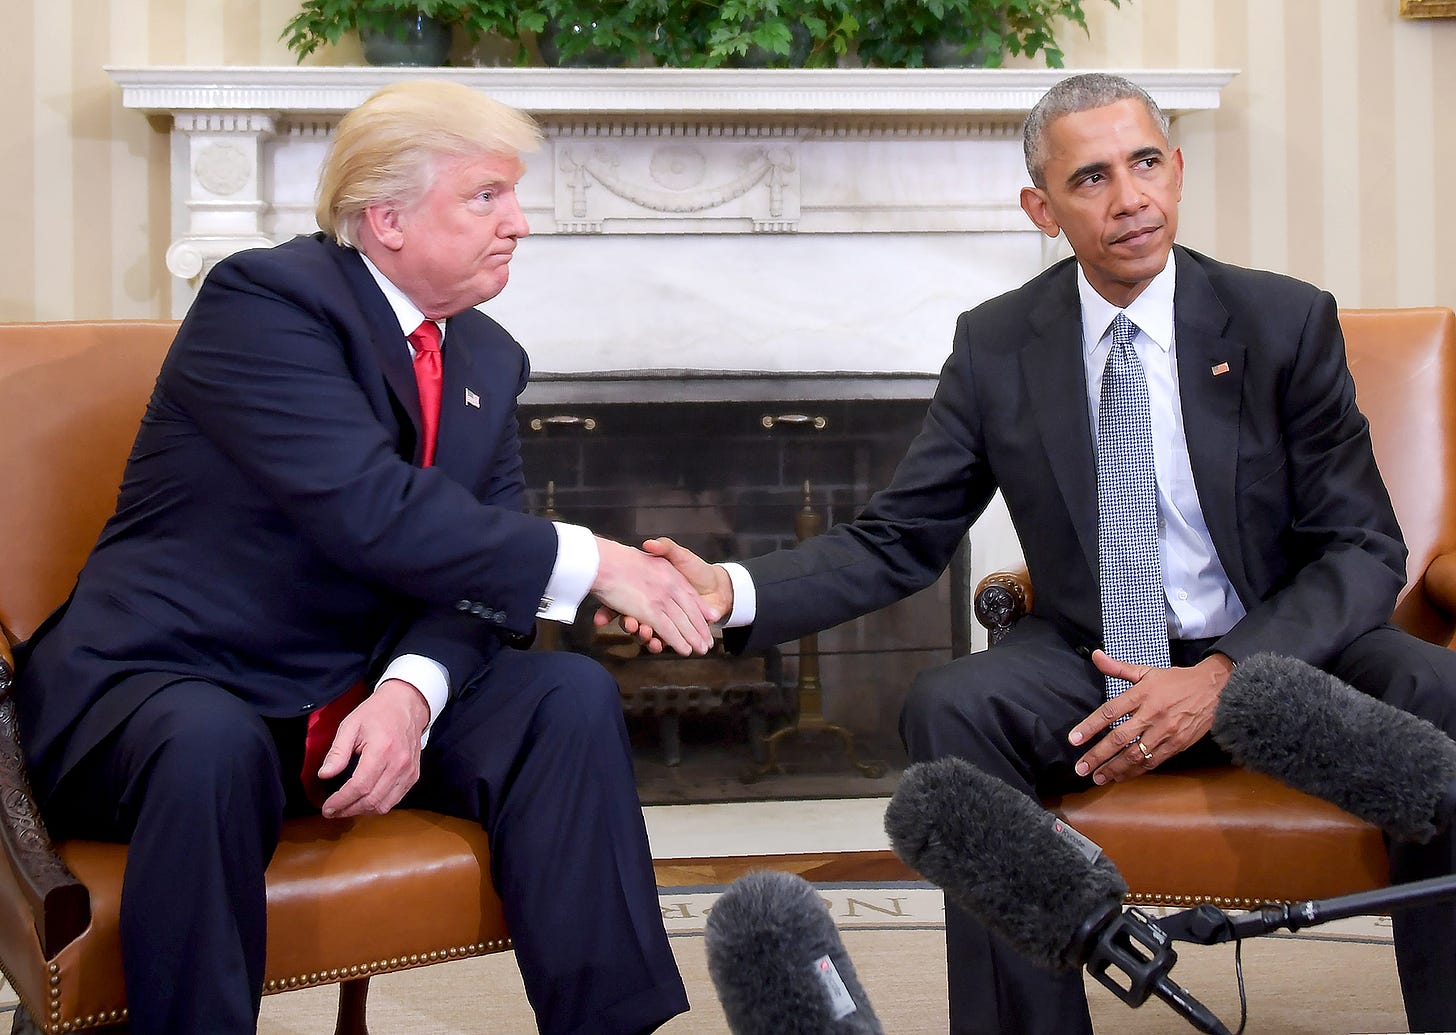 President Obama, Donald Trump Meet at White House Post-Election